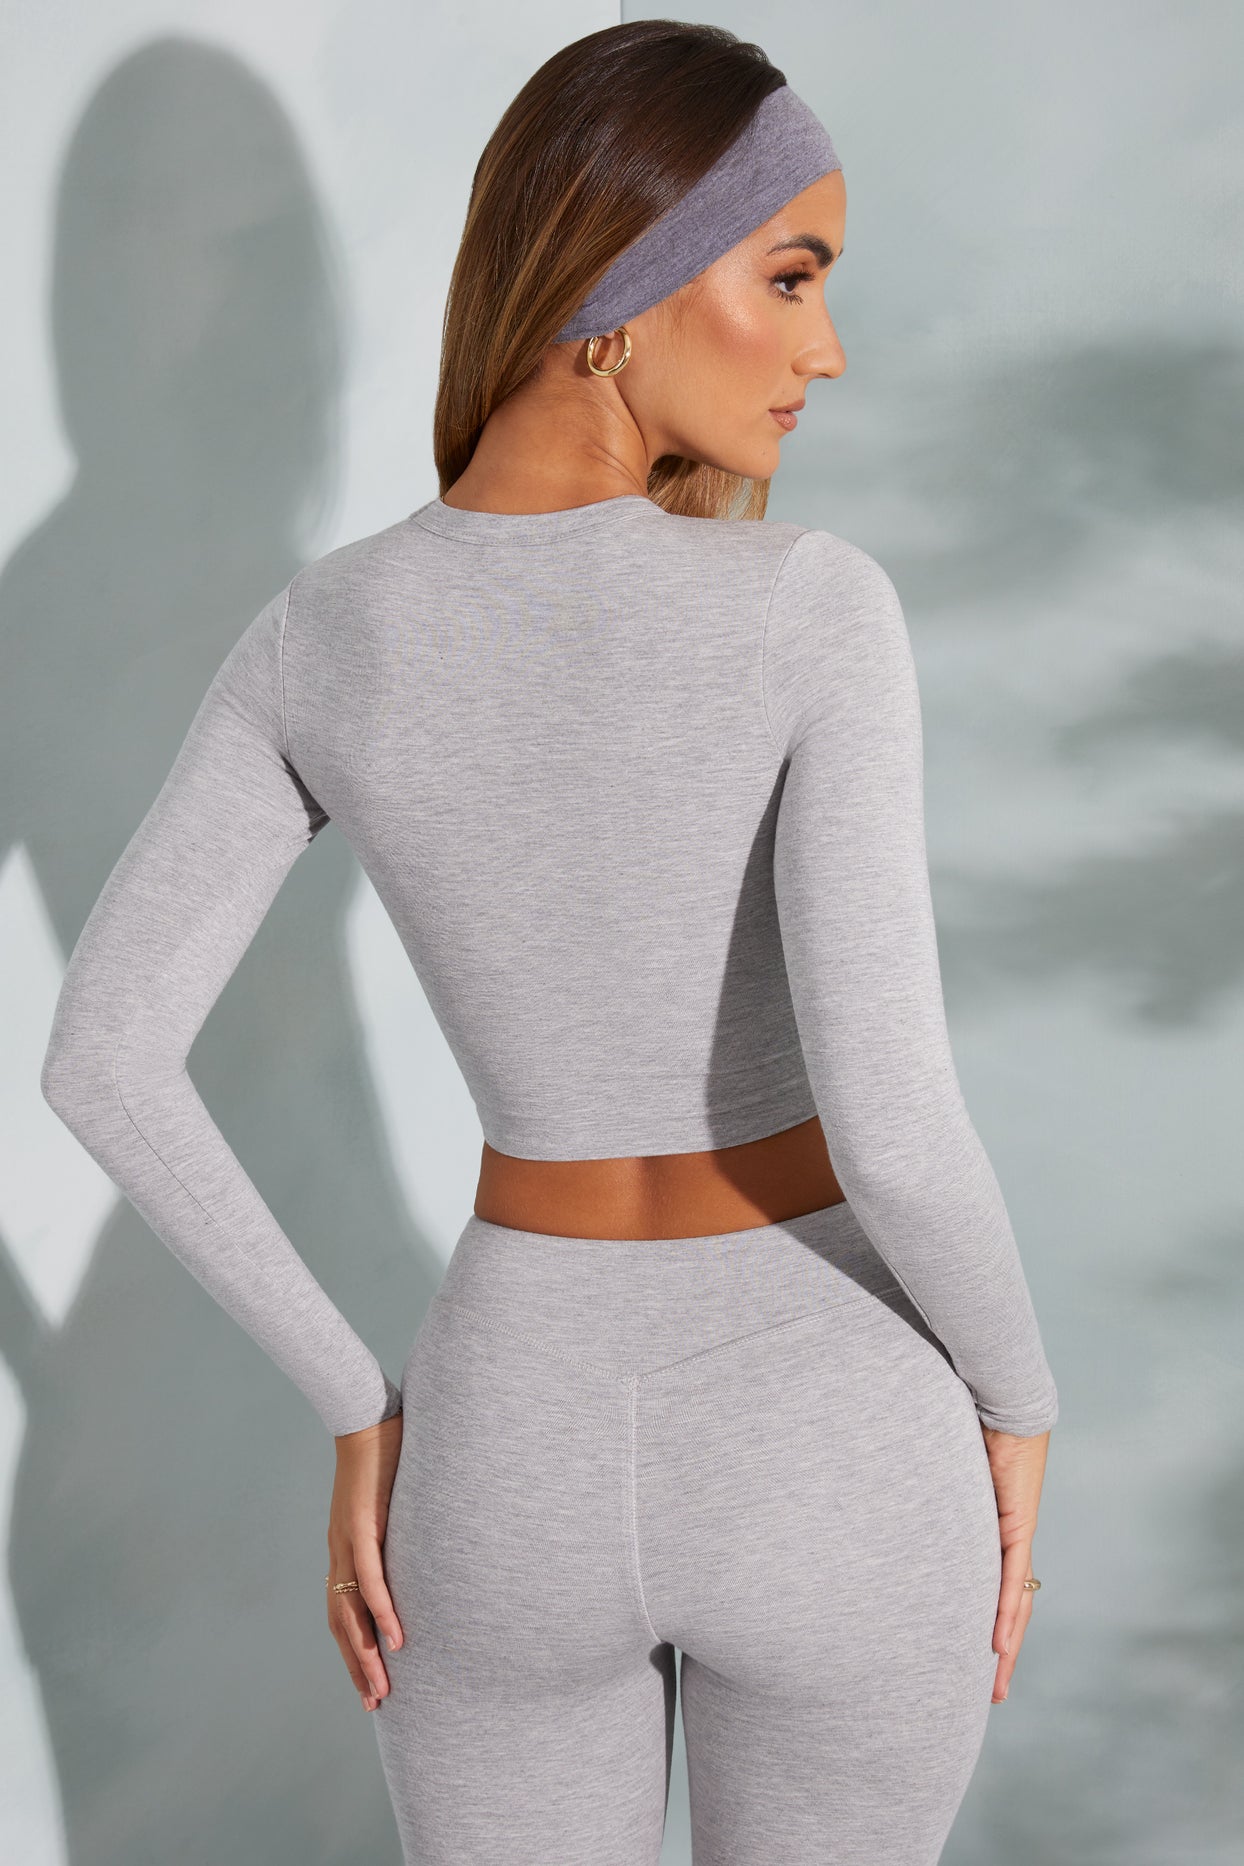 Round Neck Long Sleeve Top in Marled Grey